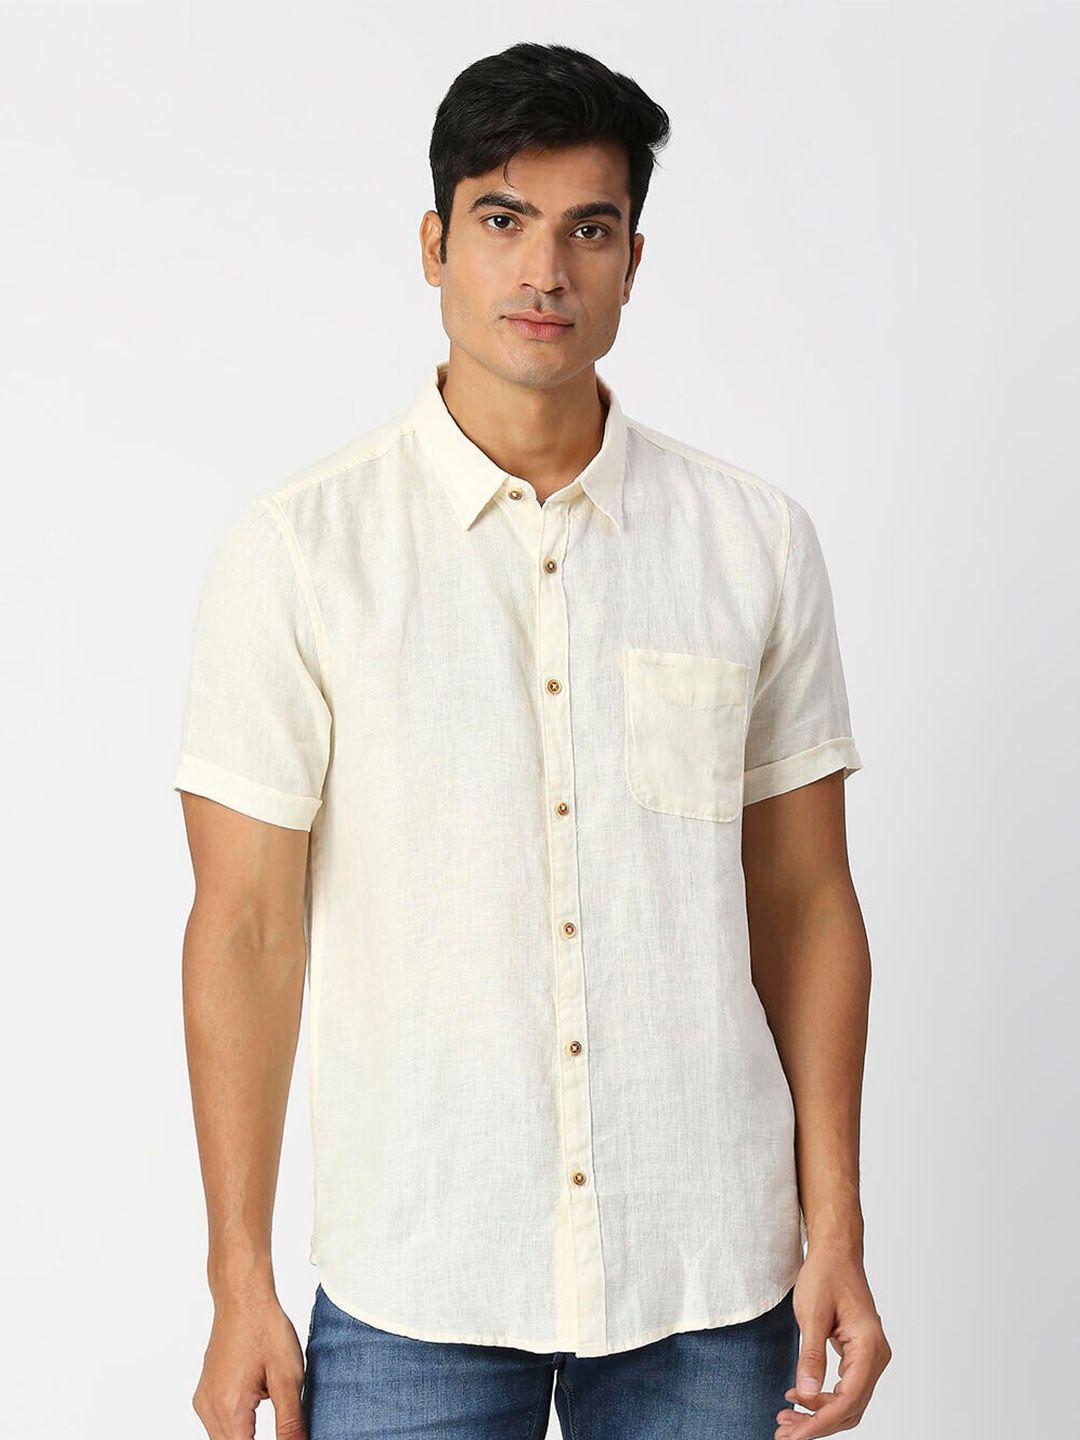 pepe-jeans-spread-collar-pure-linen-casual-shirt